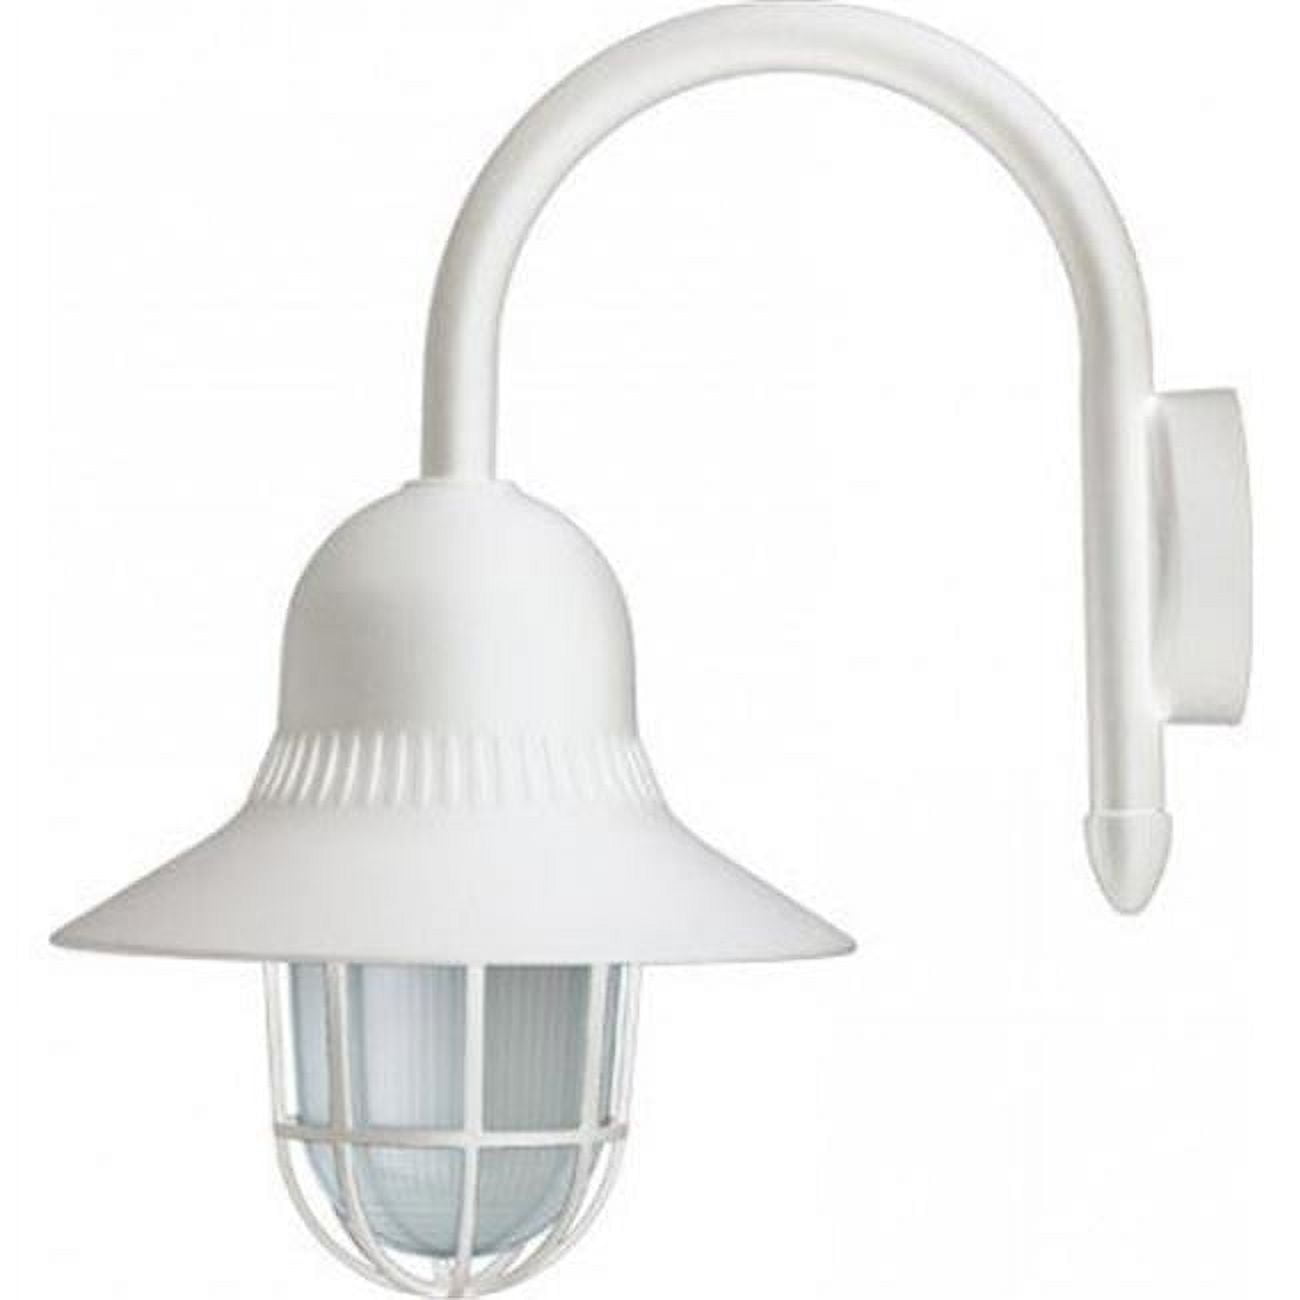 Picture of Dabmar Lighting GM997-LED16-W 16W & 85-265V LED Marquee Wall Light Fixture - White